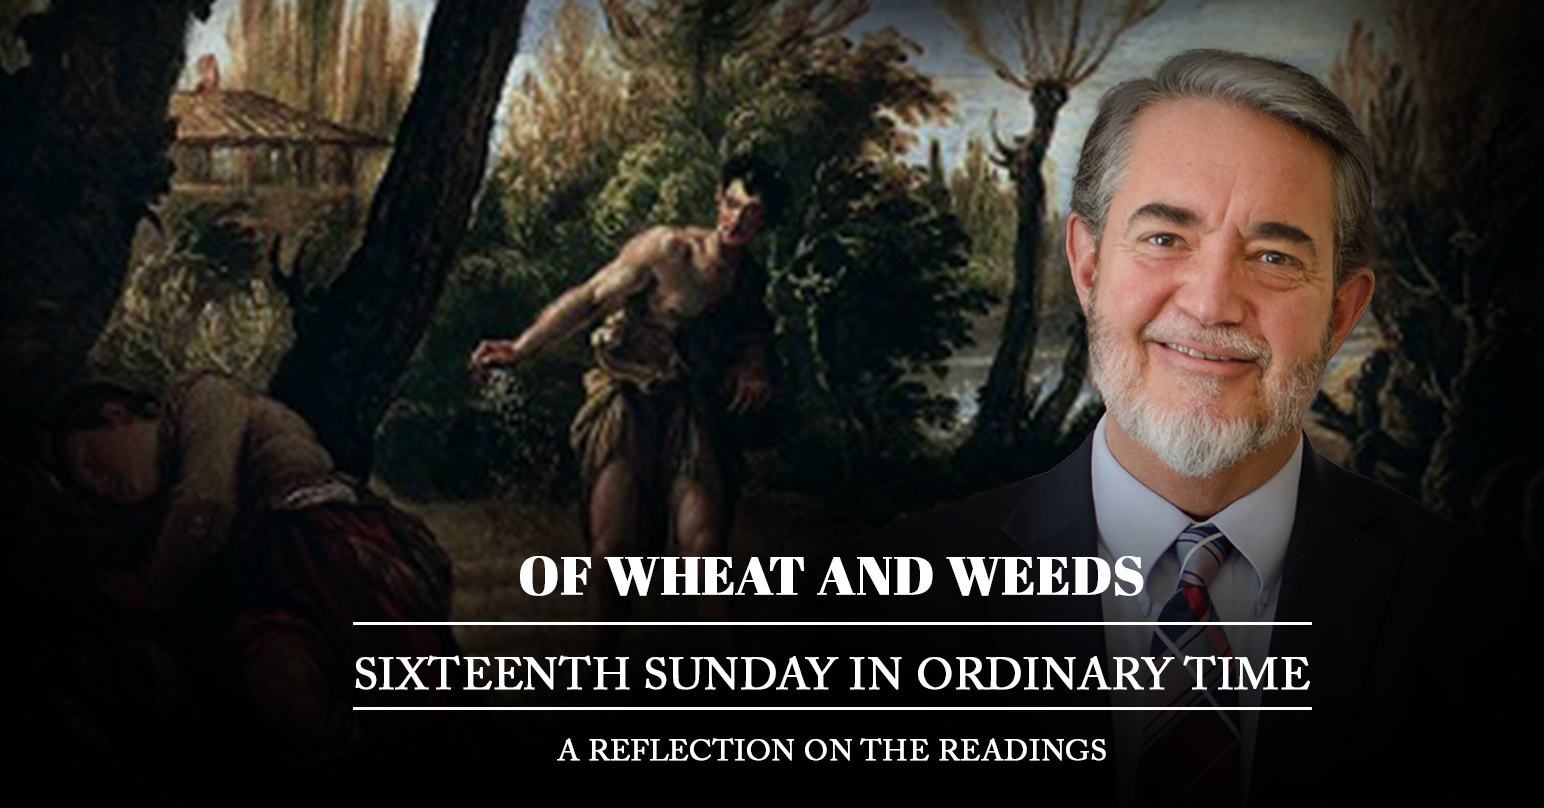 Of Wheat and Weeds: Scott Hahn Reflects on the Sixteenth Sunday in Ordinary Time